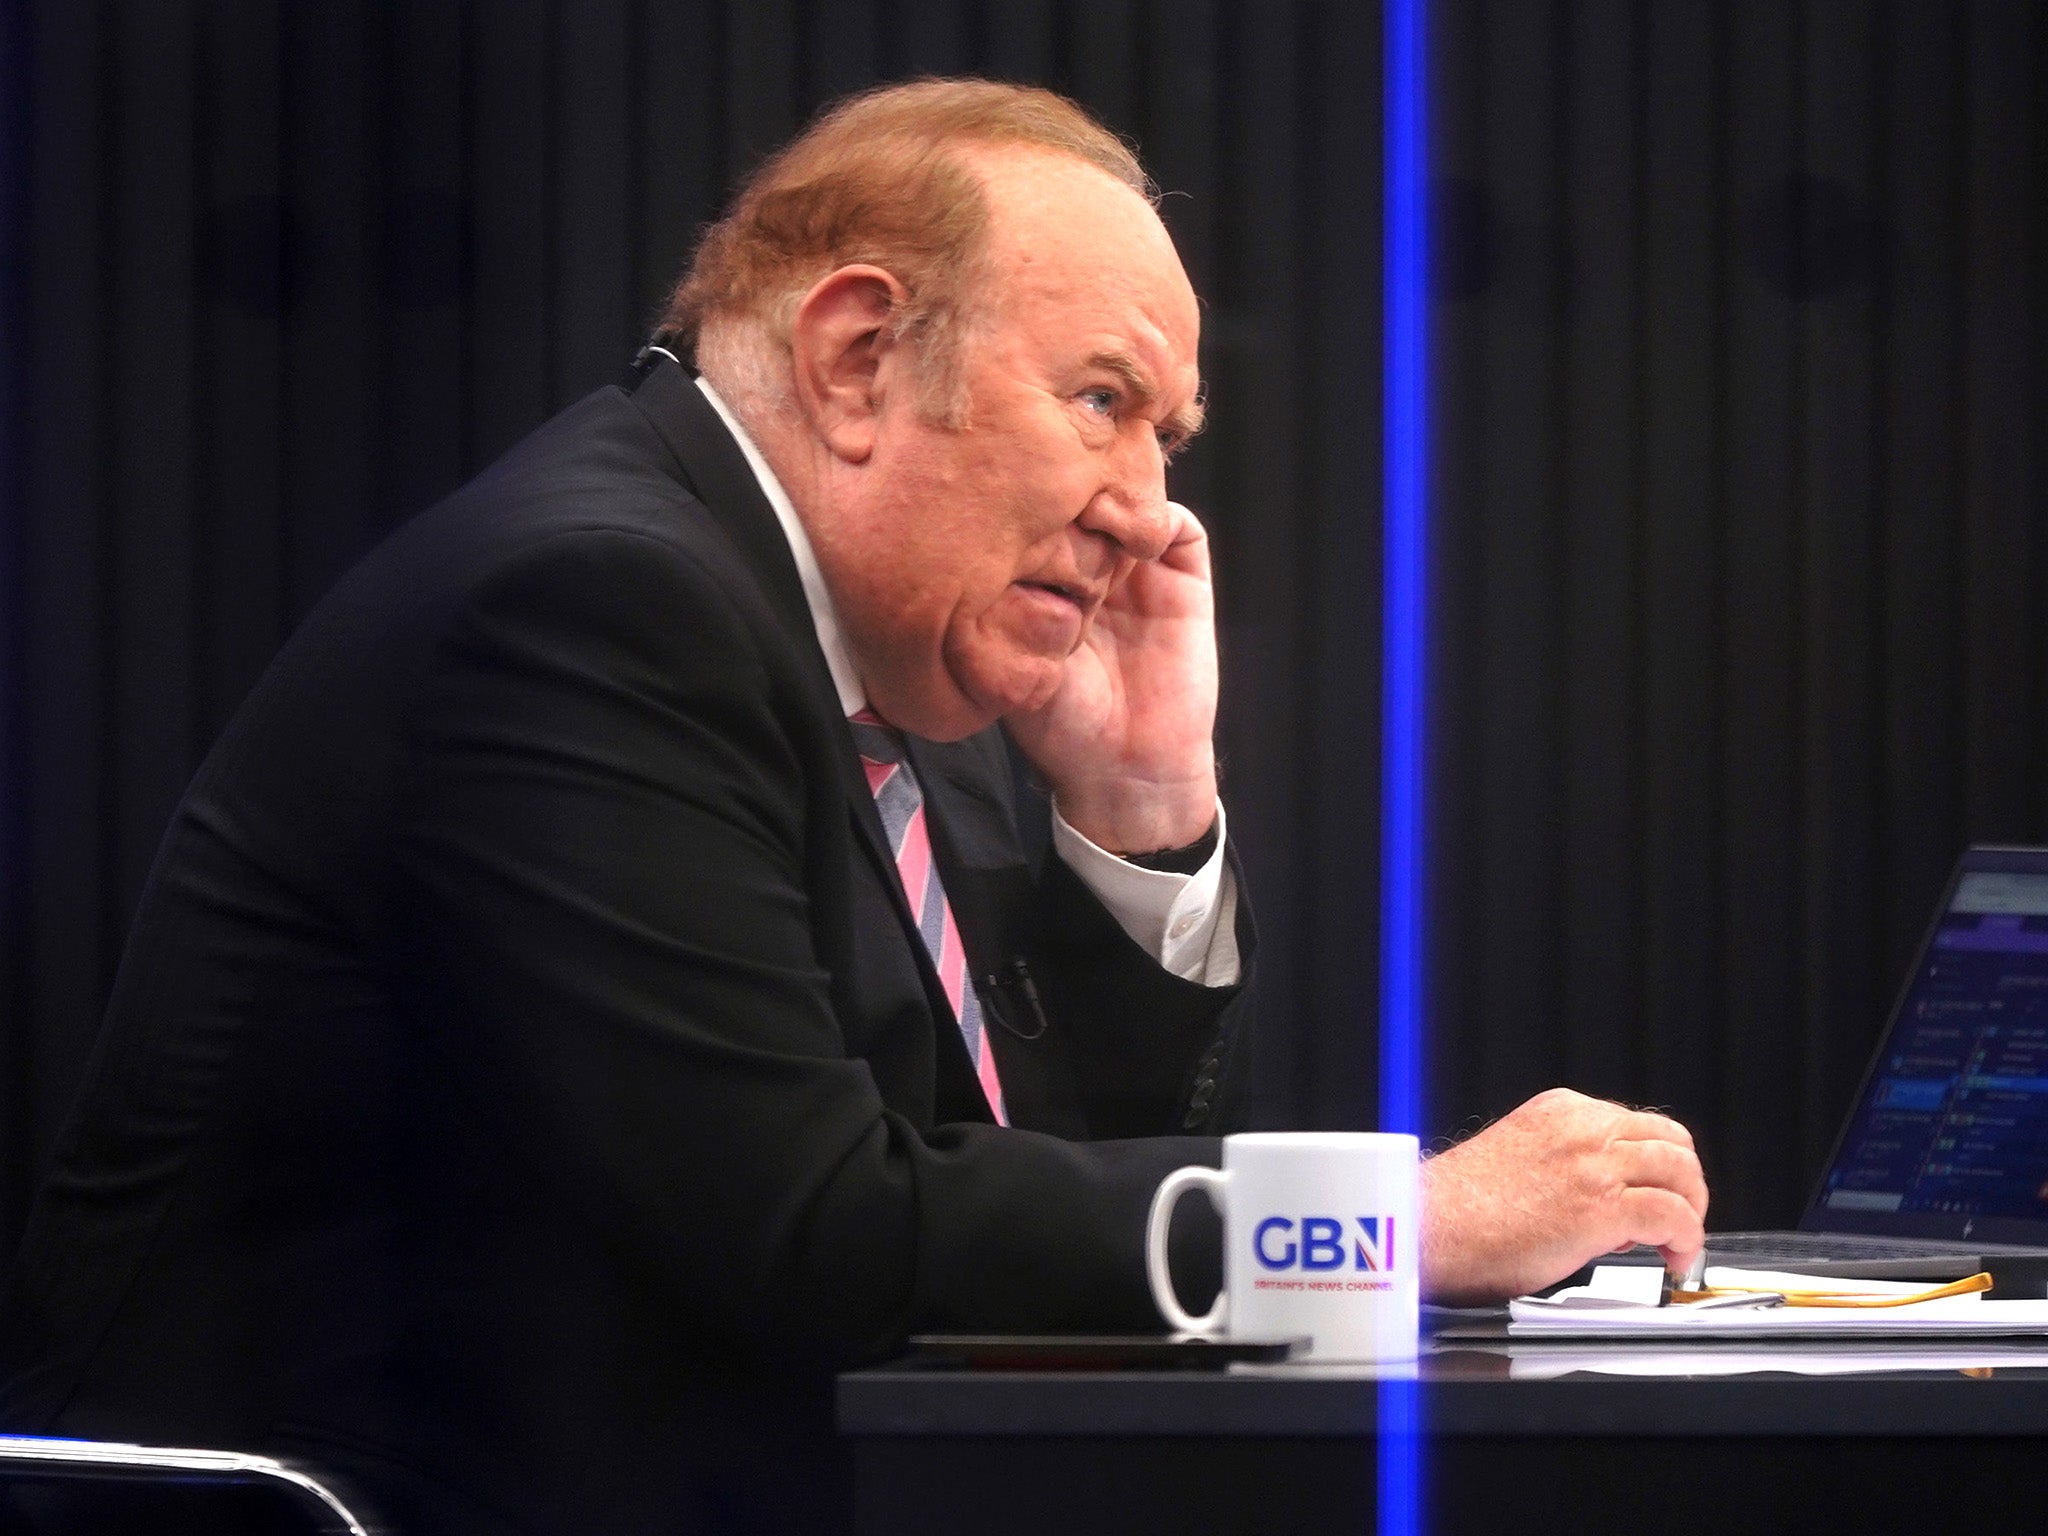 Andrew Neil has quit GB News just three months after leading its launch